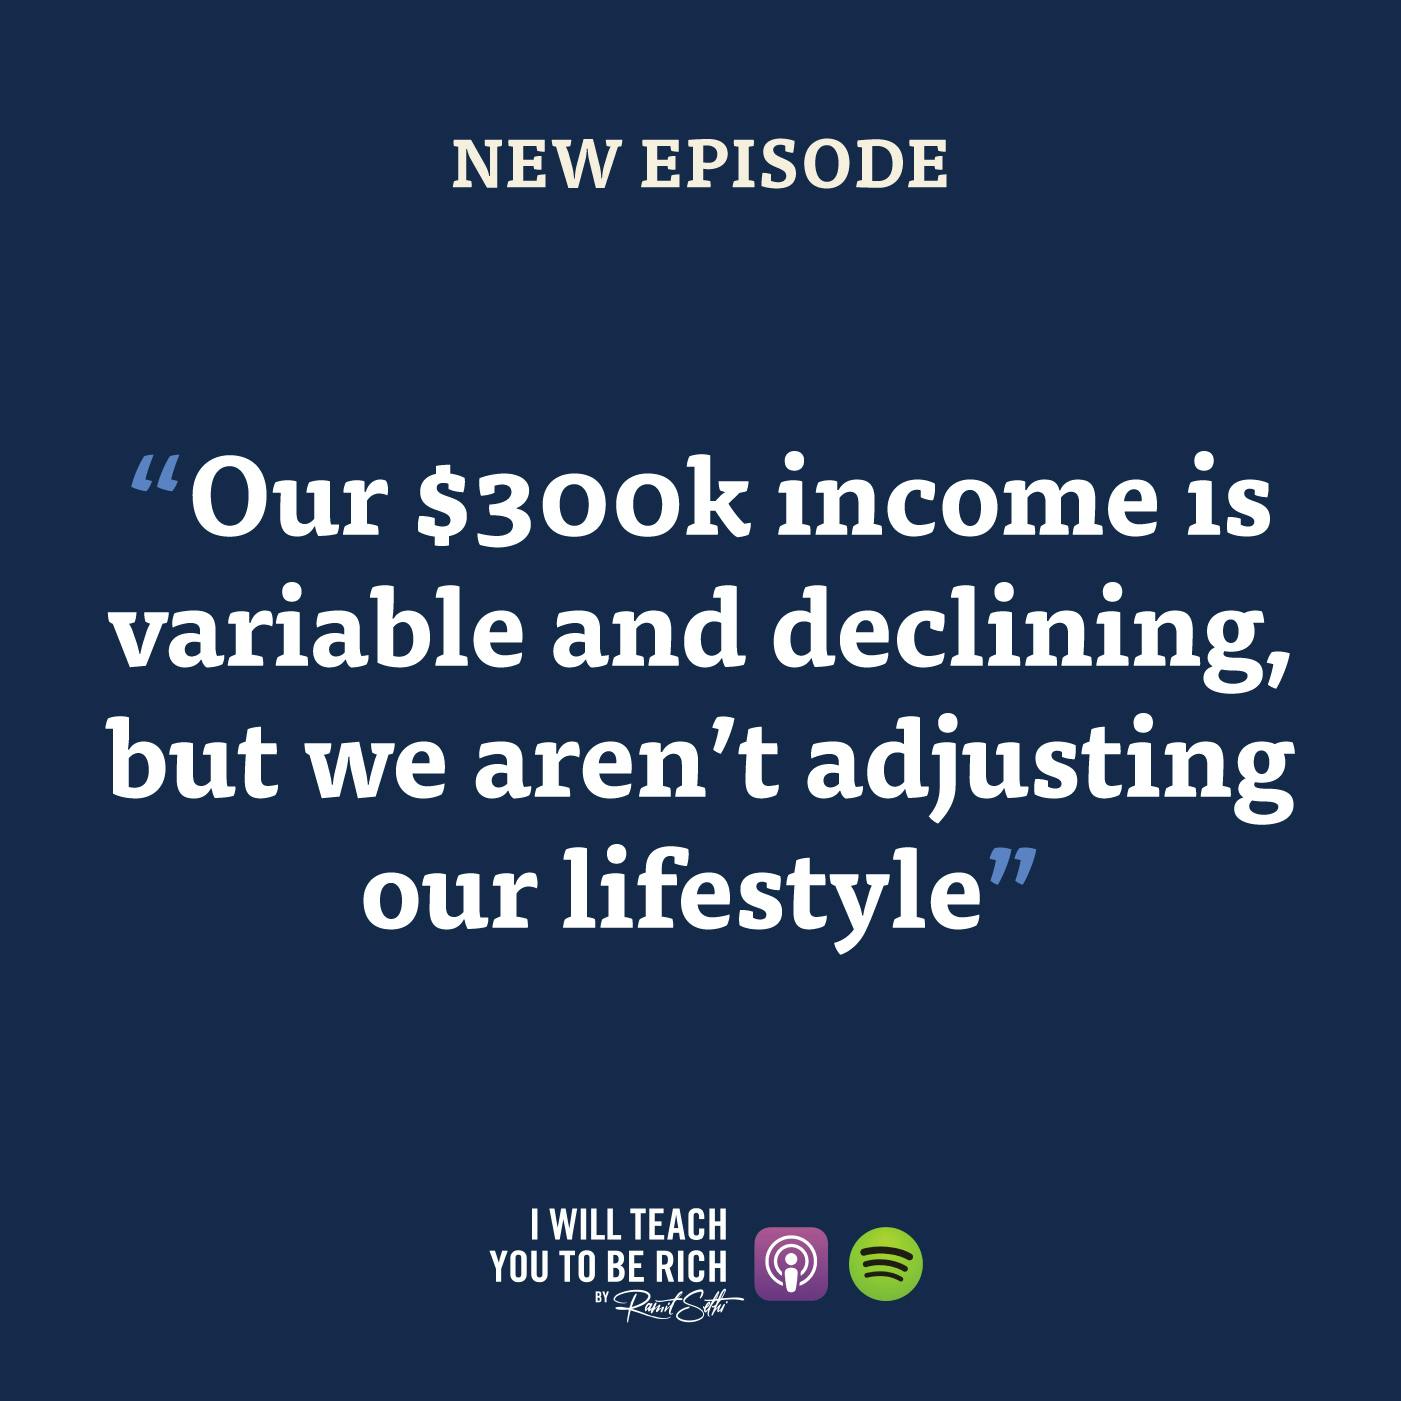 43. “Our $300k income is variable and declining but we aren’t adjusting our lifestyle”